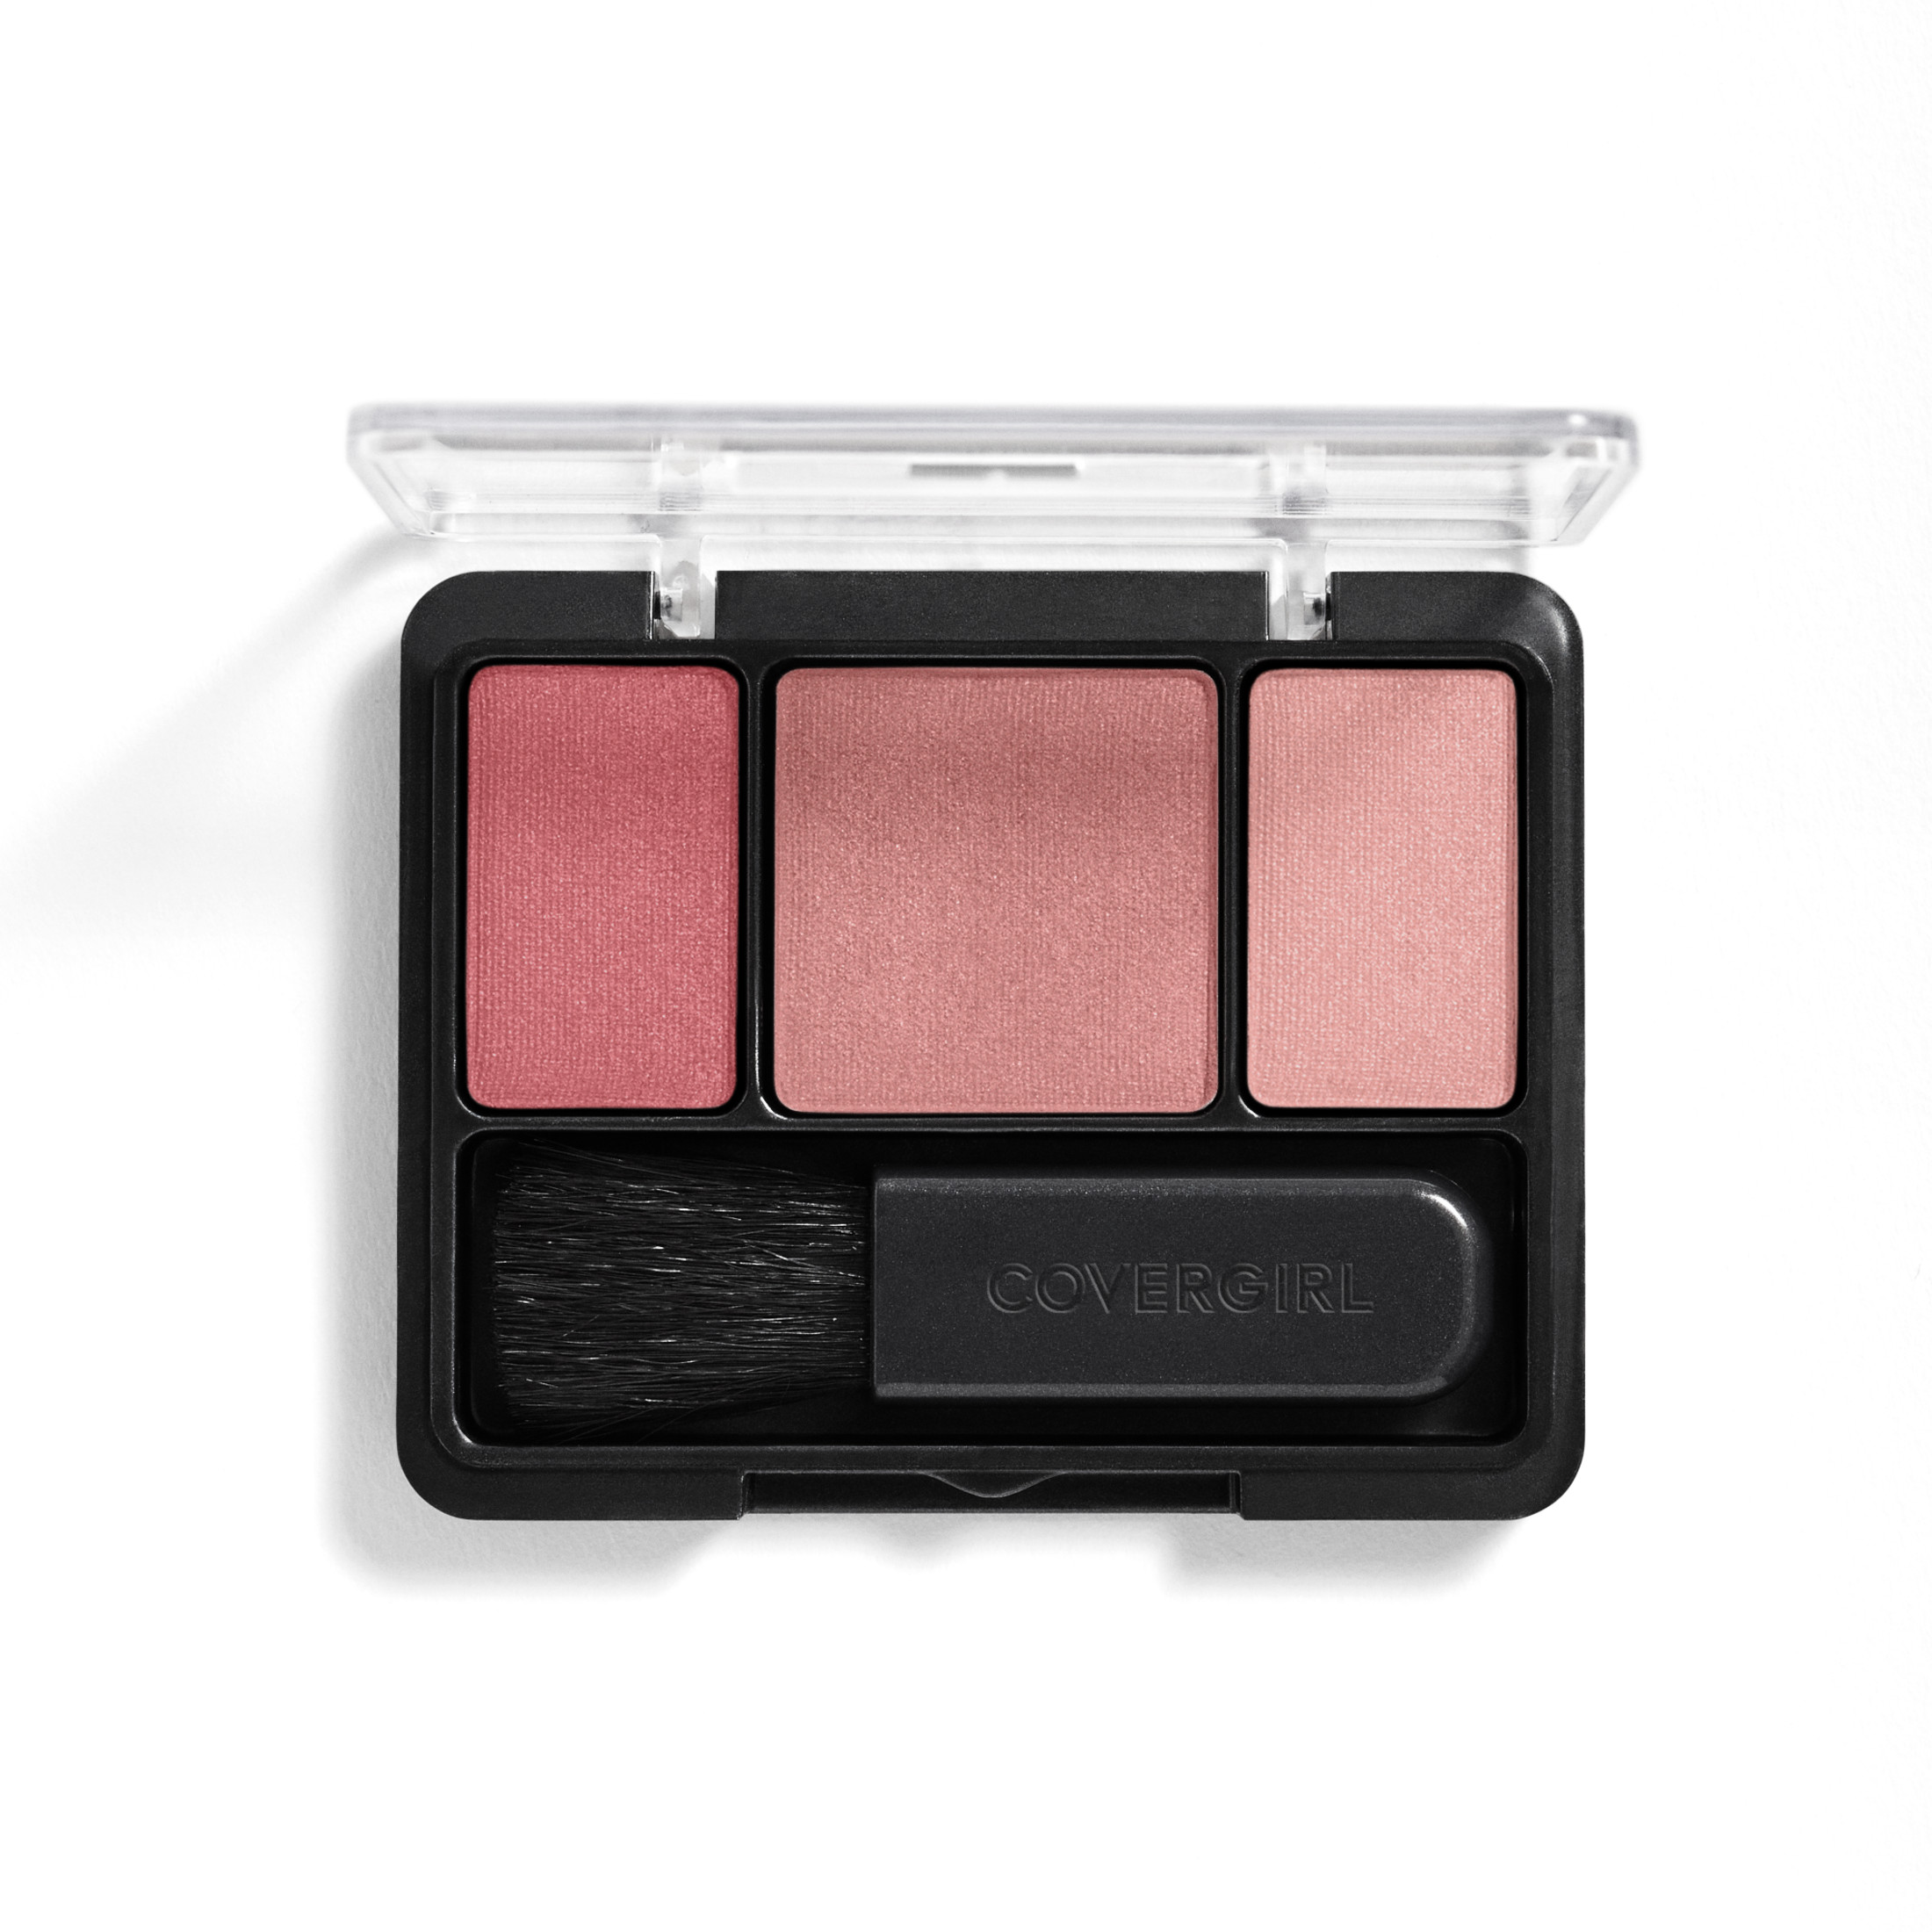 COVERGIRL Instant Cheekbones Contouring Blush, 230 Refined Rose, 0.29 oz - image 2 of 6